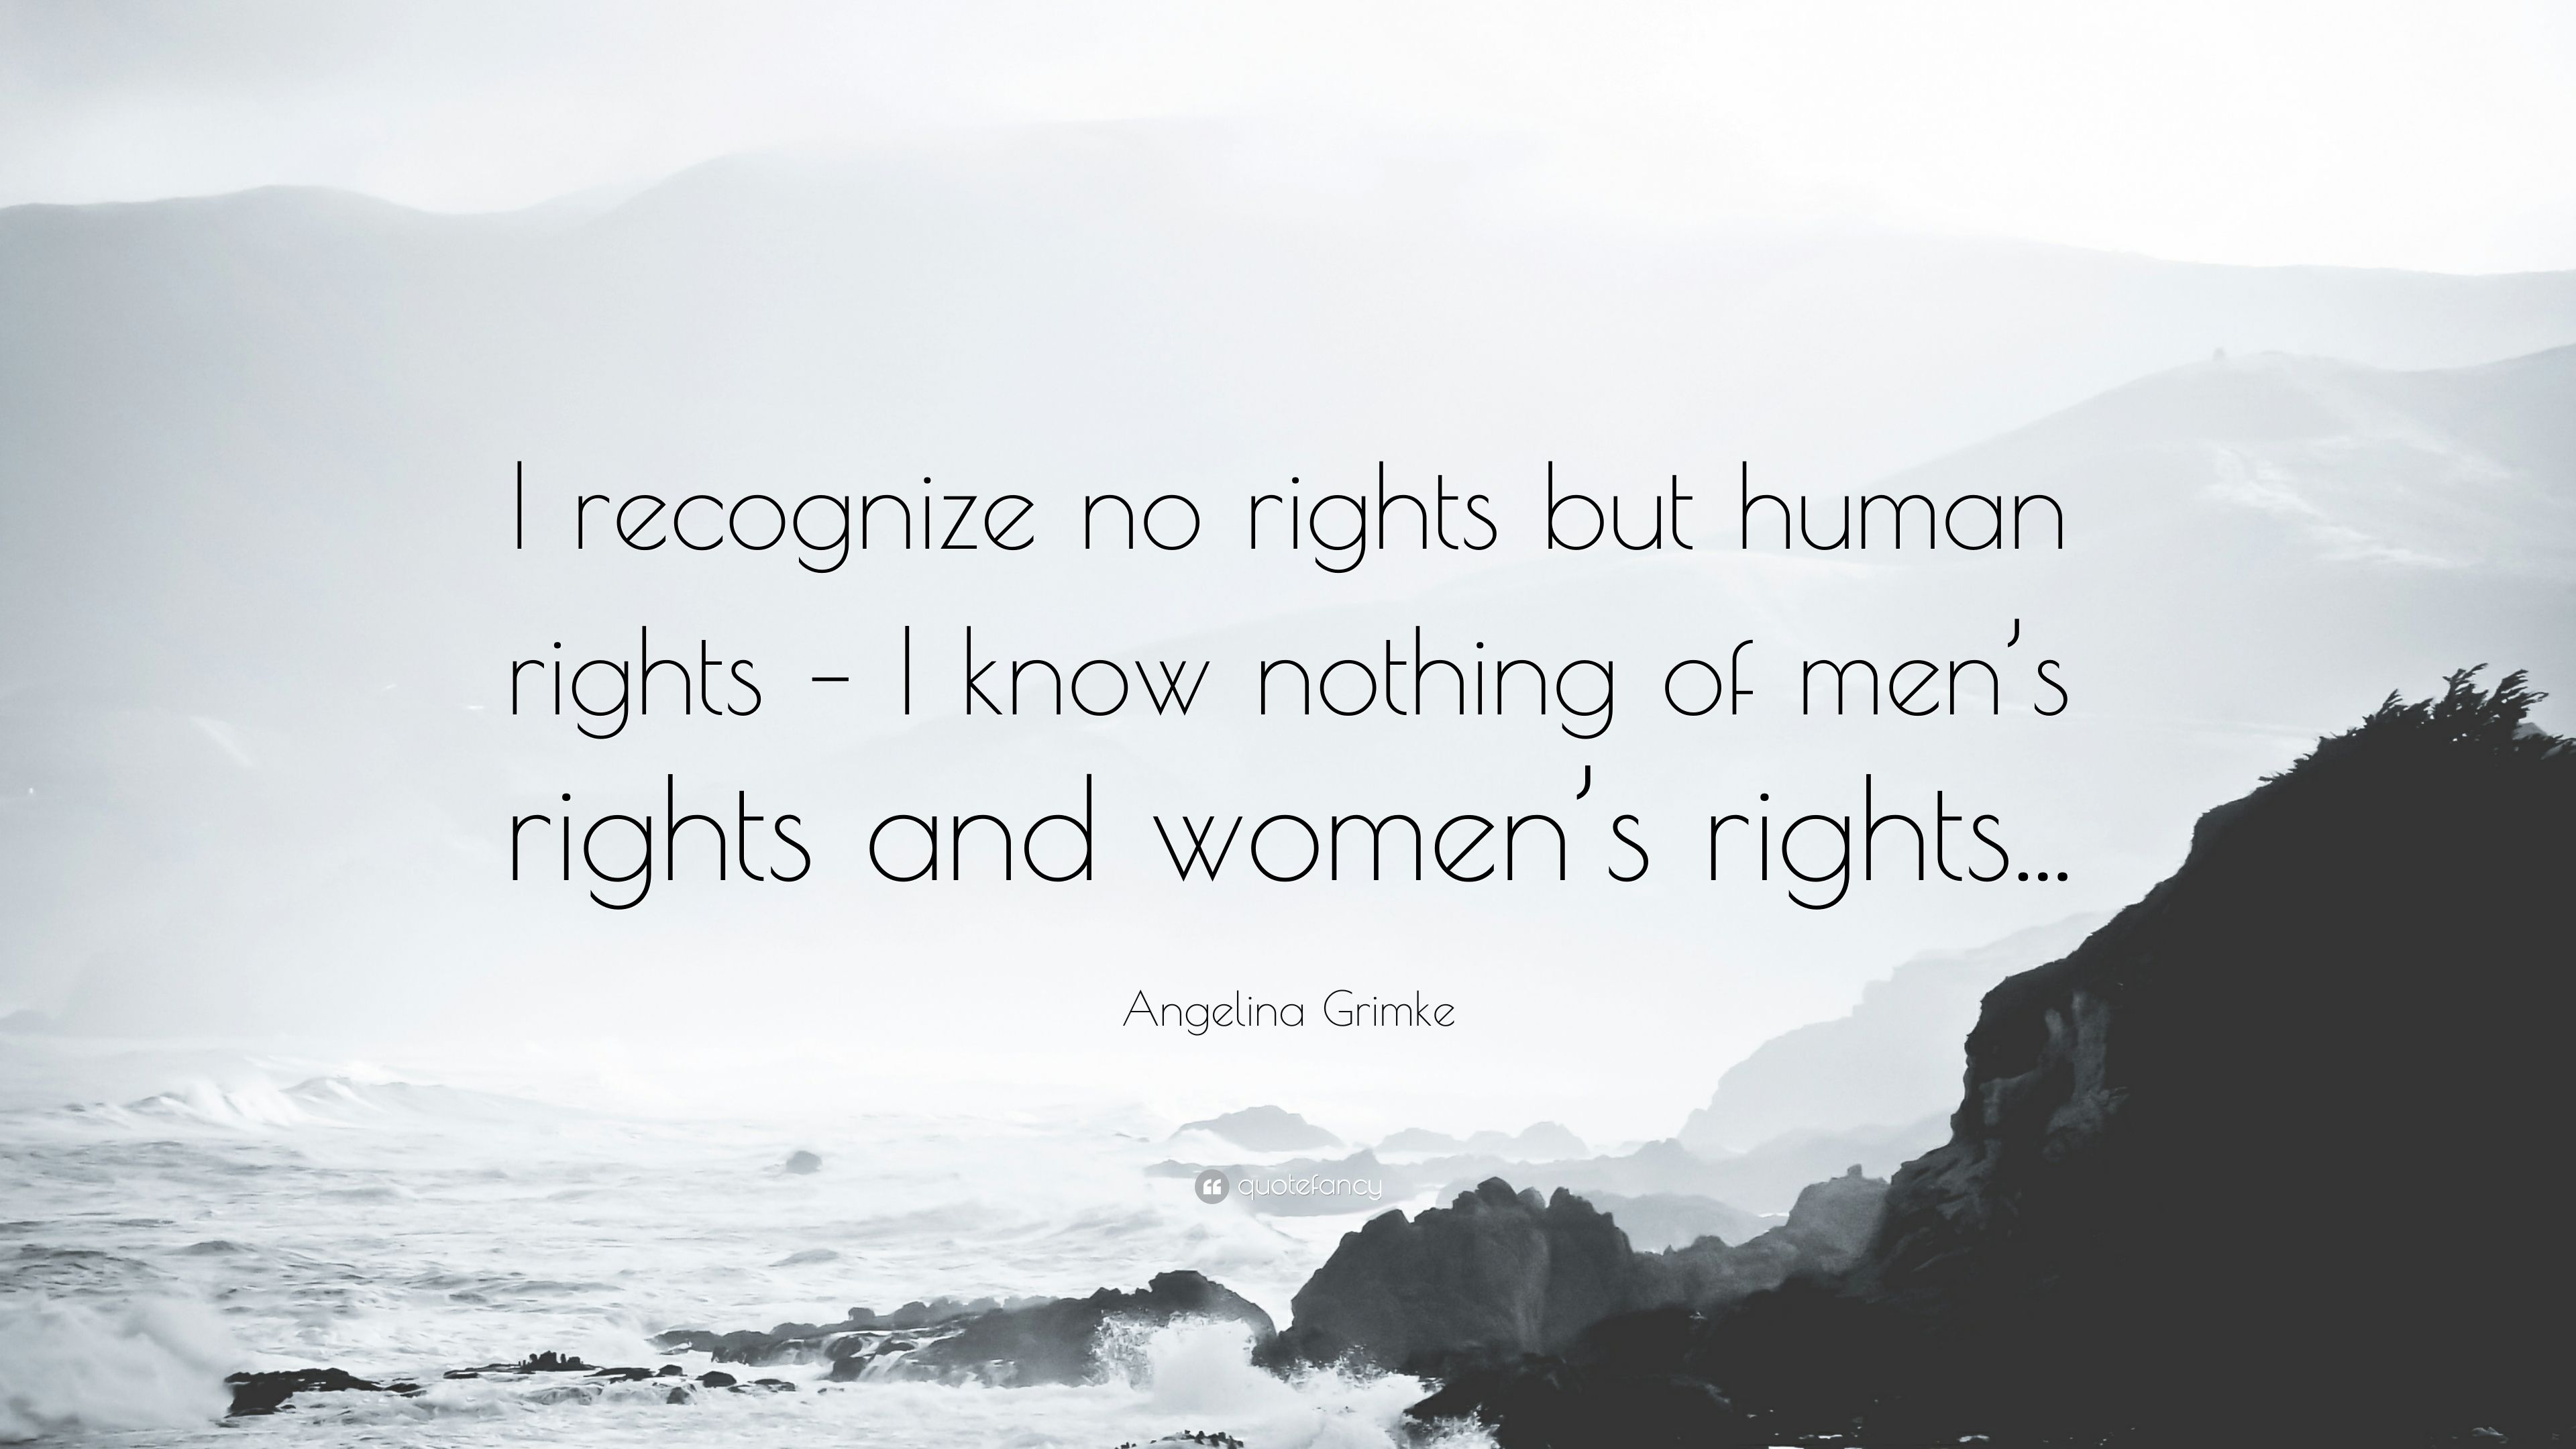 Angelina Grimke Quote: “I recognize no rights but human rights